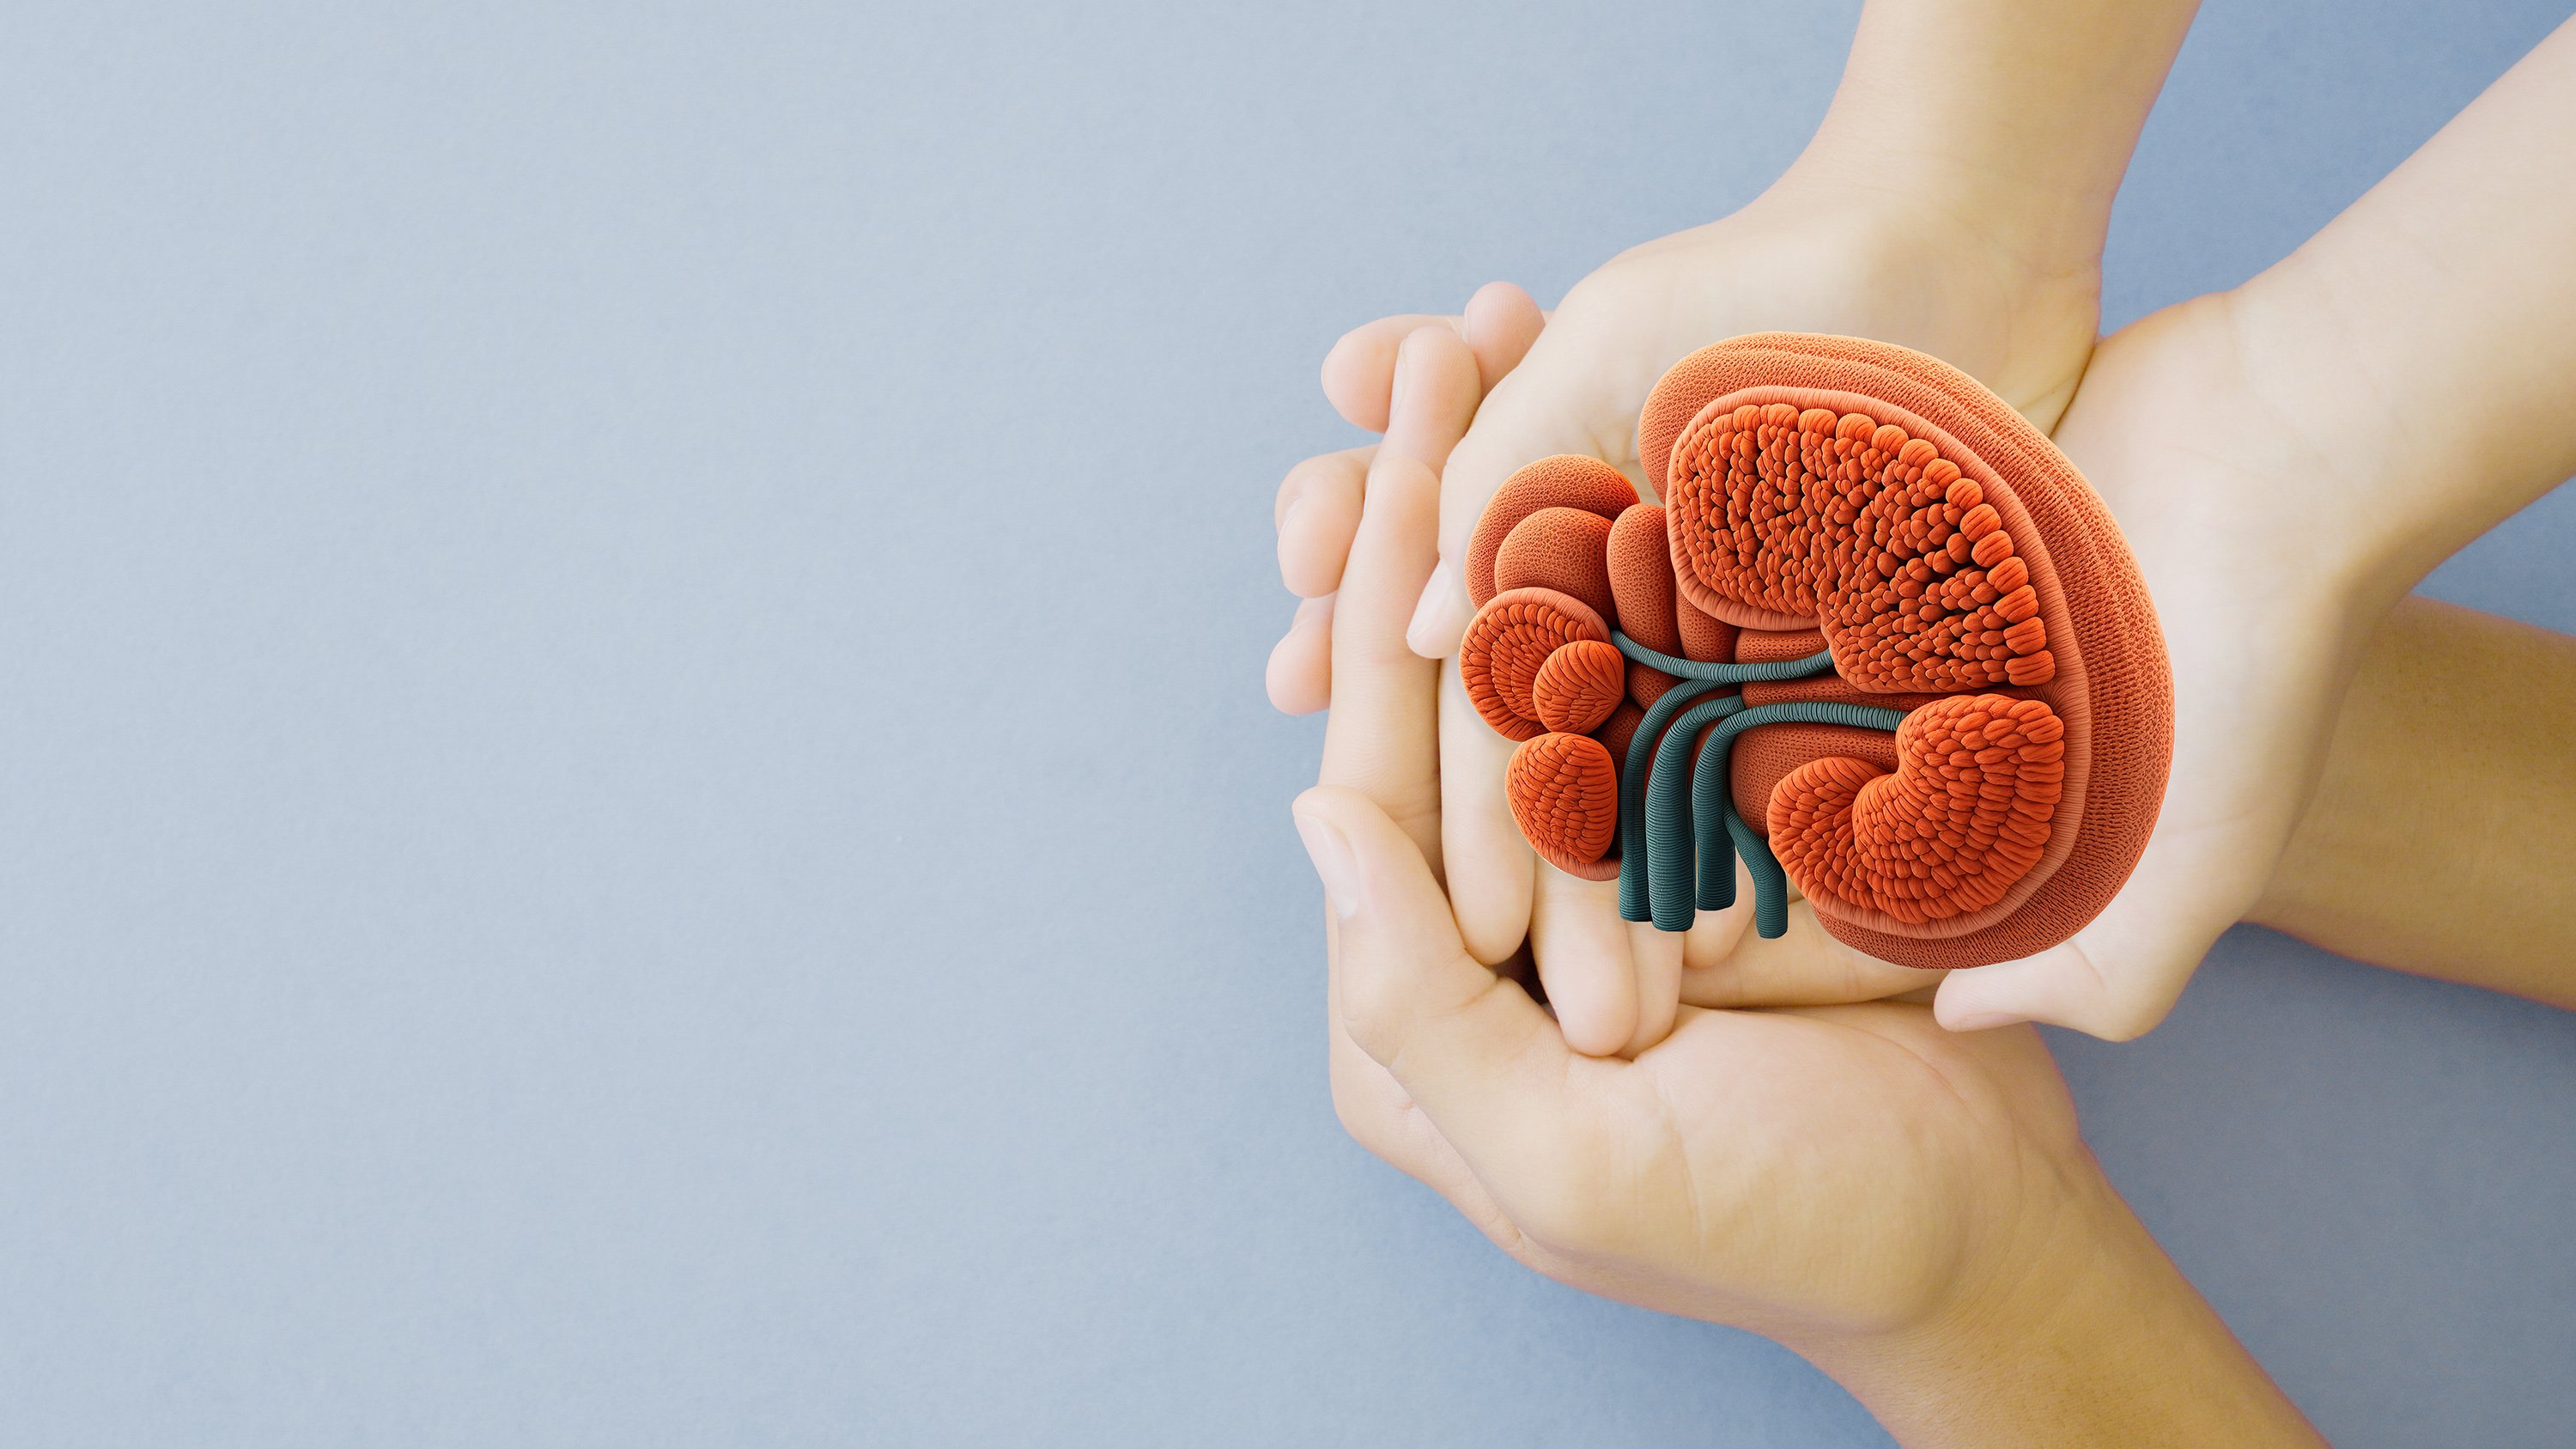 Medeor cell therapy helps kidney transplant patients taper off immunosuppressant meds